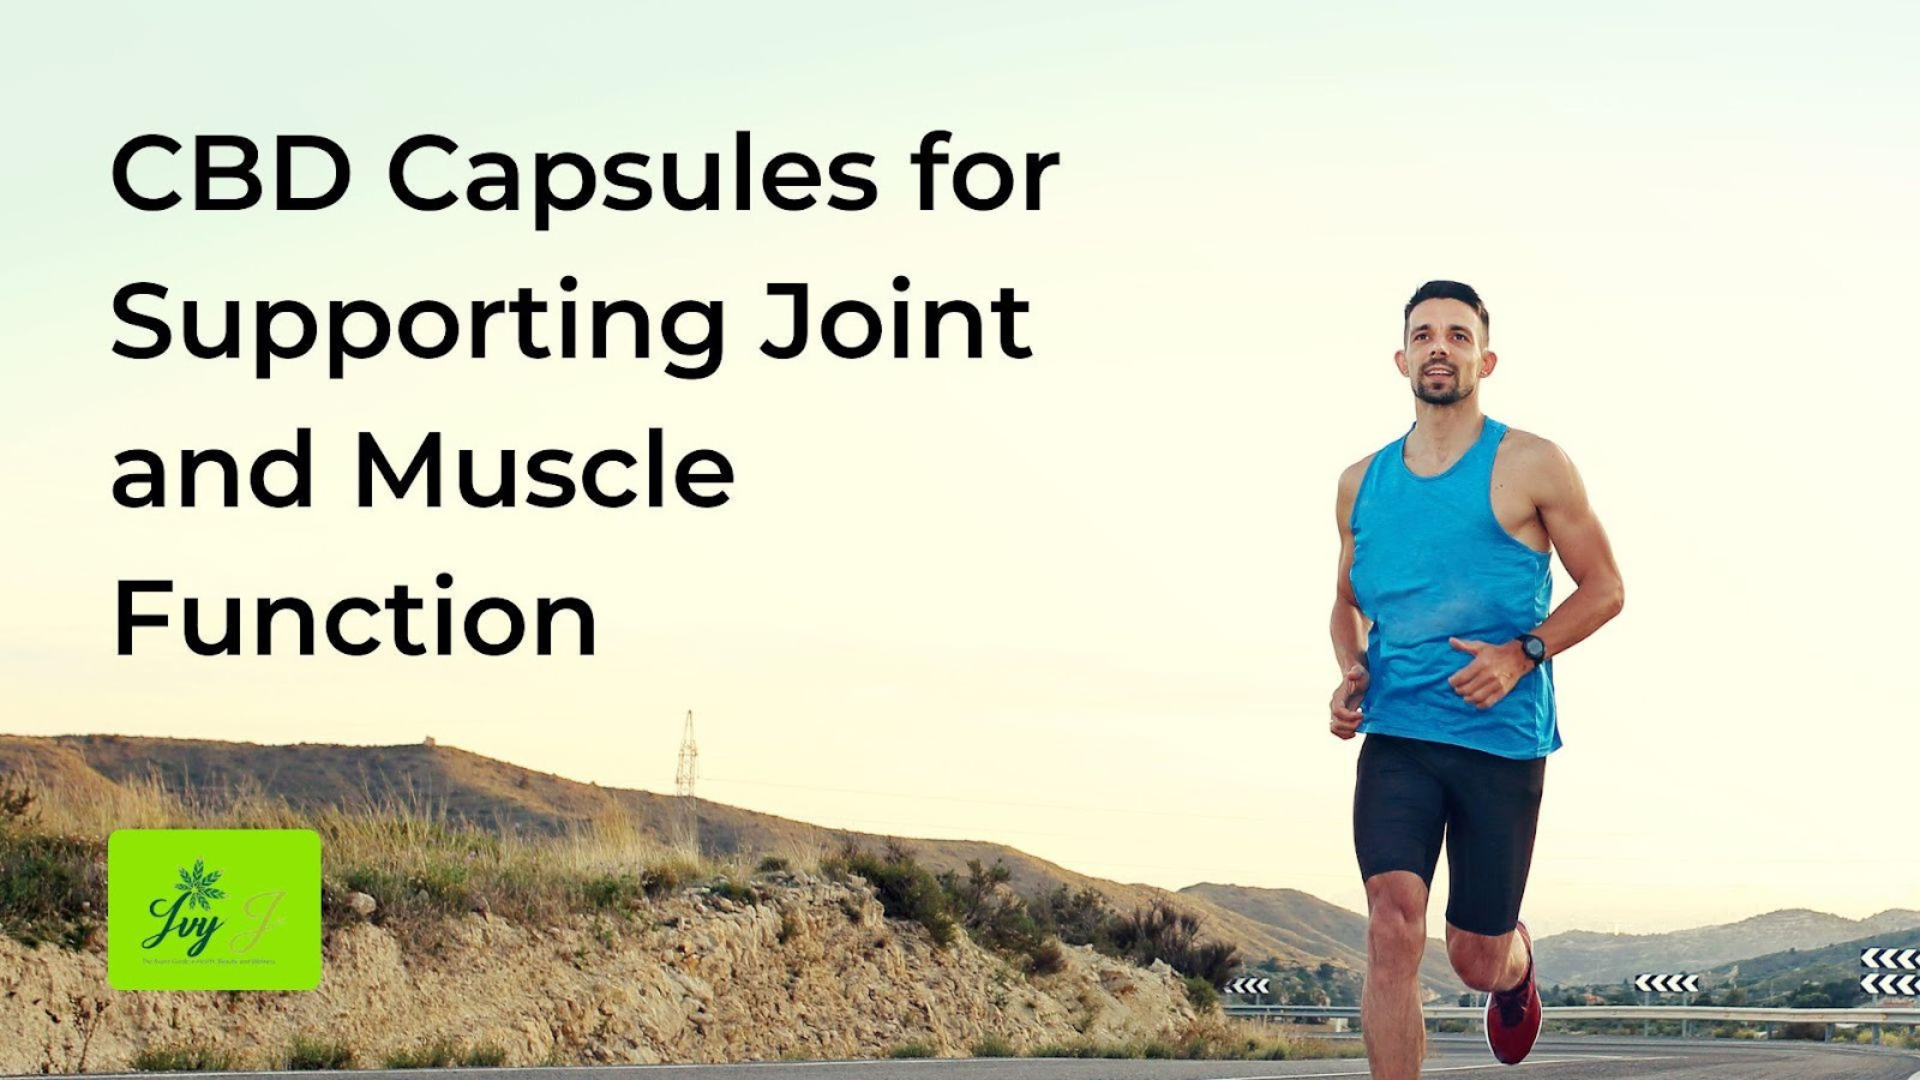 5 Benefits of CBD Capsules for Supporting Joint and Muscle Function